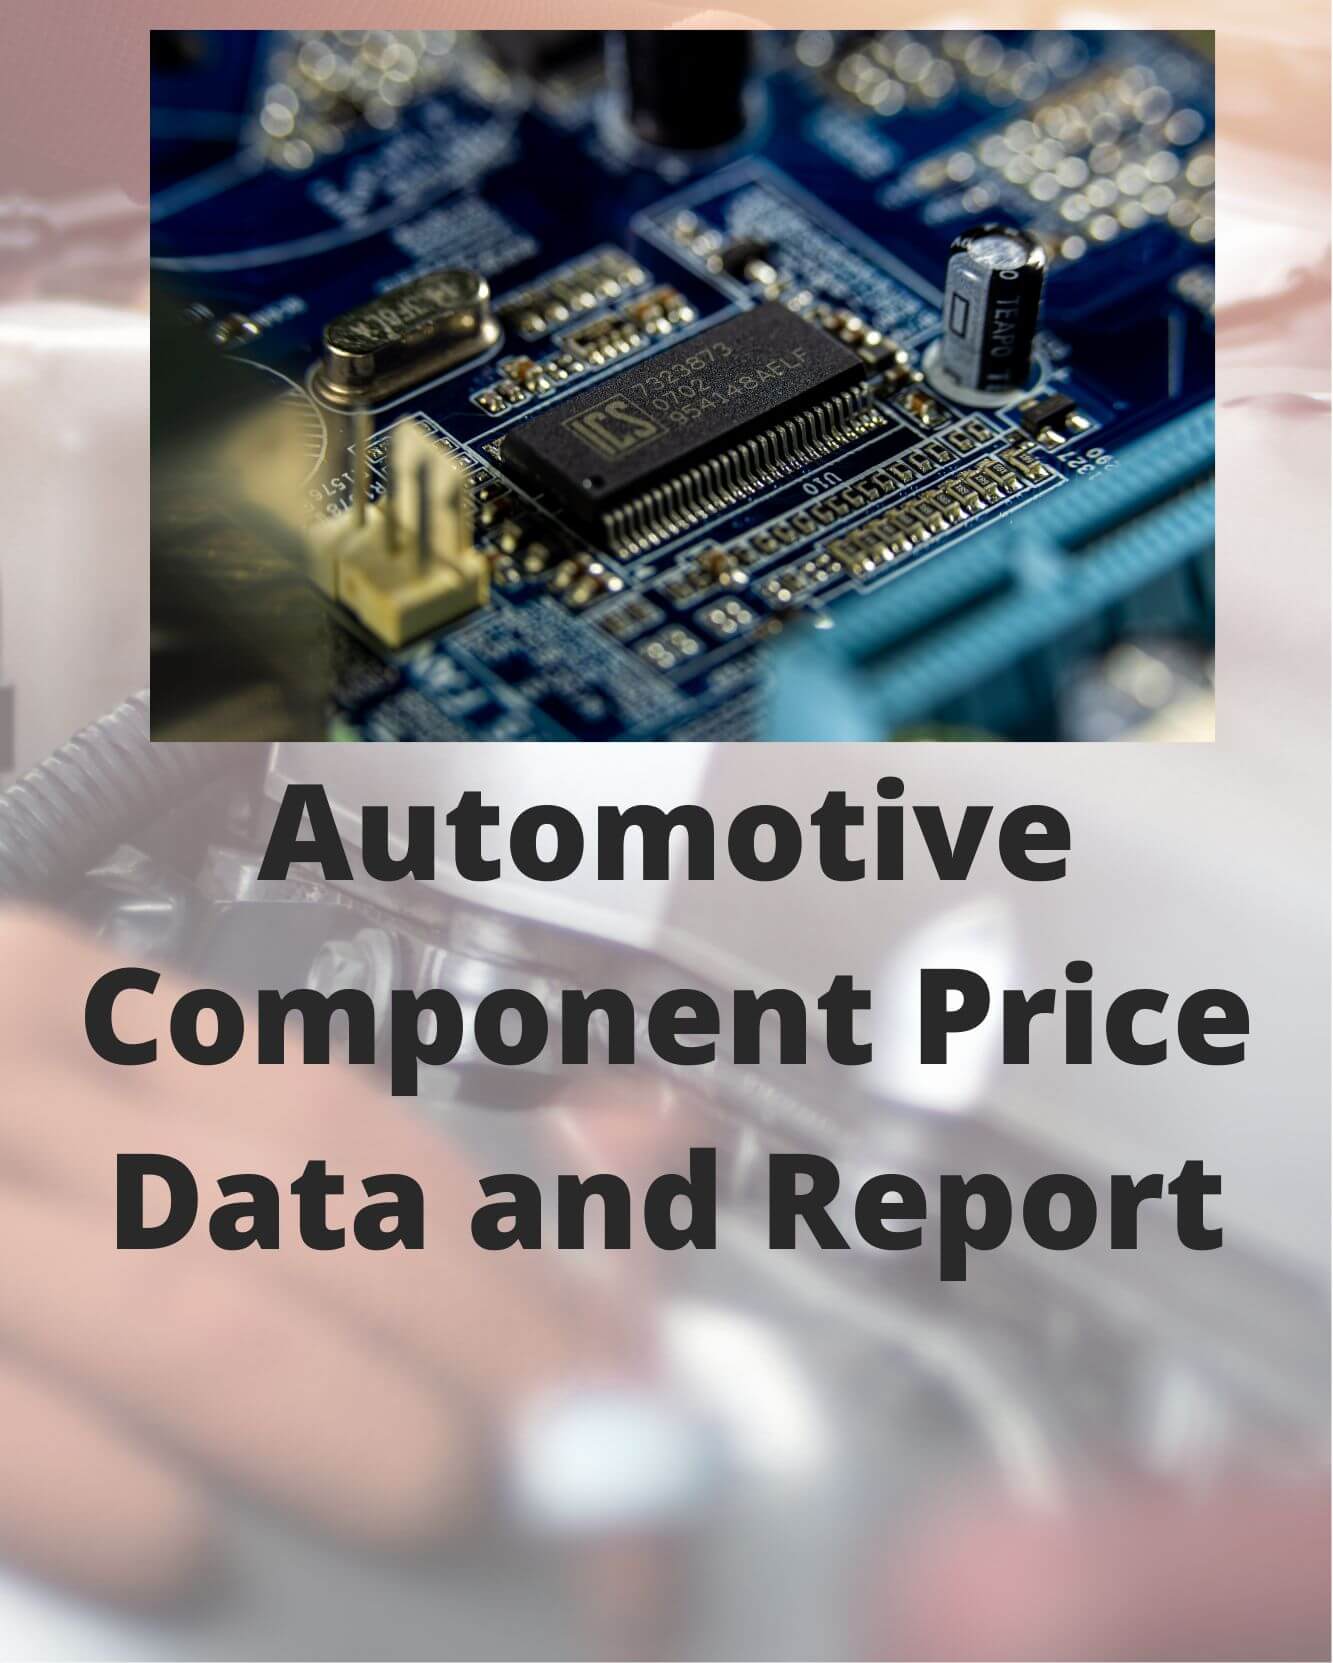 Automotive Component Price Data and Report